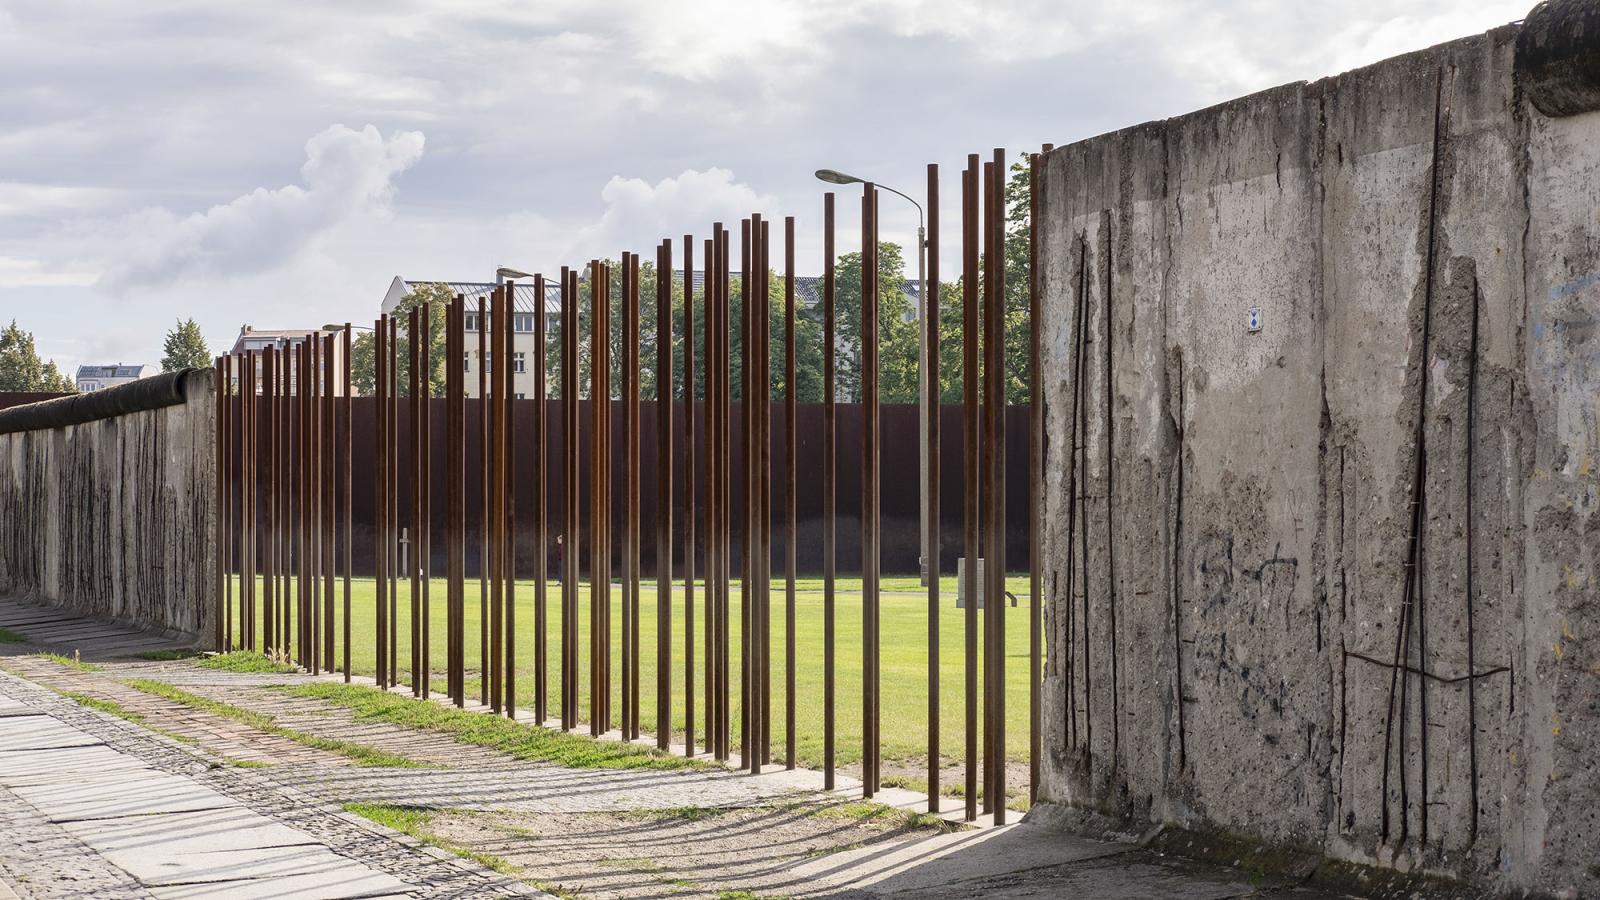 The Berlin Wall Memorial on Bernauer Strasse with remains of the Wall and iron bars